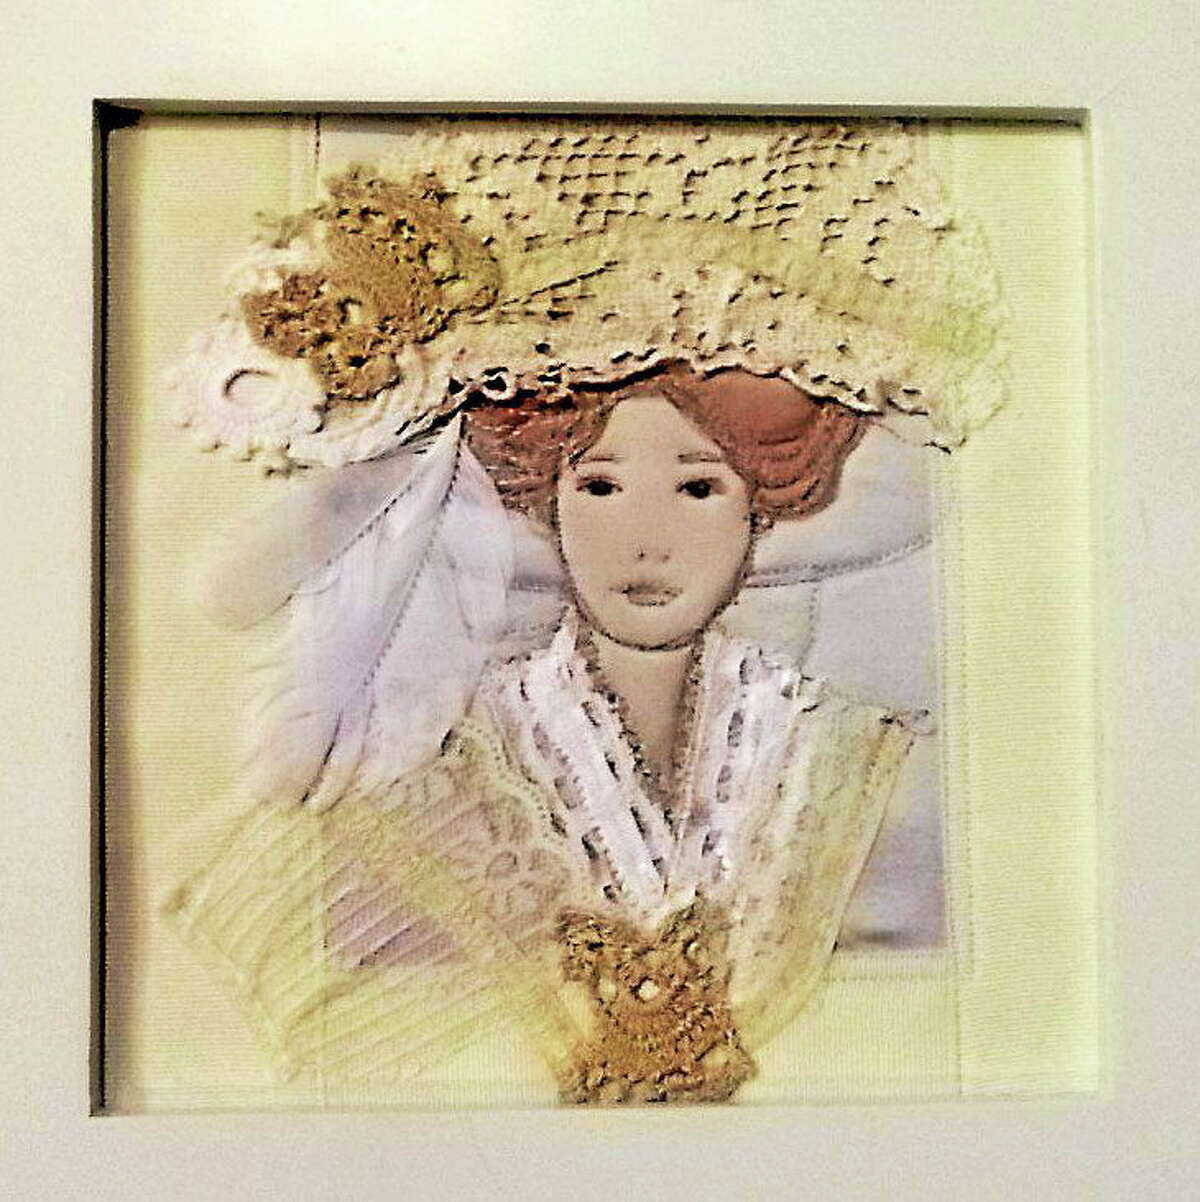 Submitted photo - The Artist's Path White works of art, such as this "Lady in White" with a touch of color, in any medium but up to 10 by 20 inches, are needed for the Artist's Path upcoming exhibition in January, White on White.